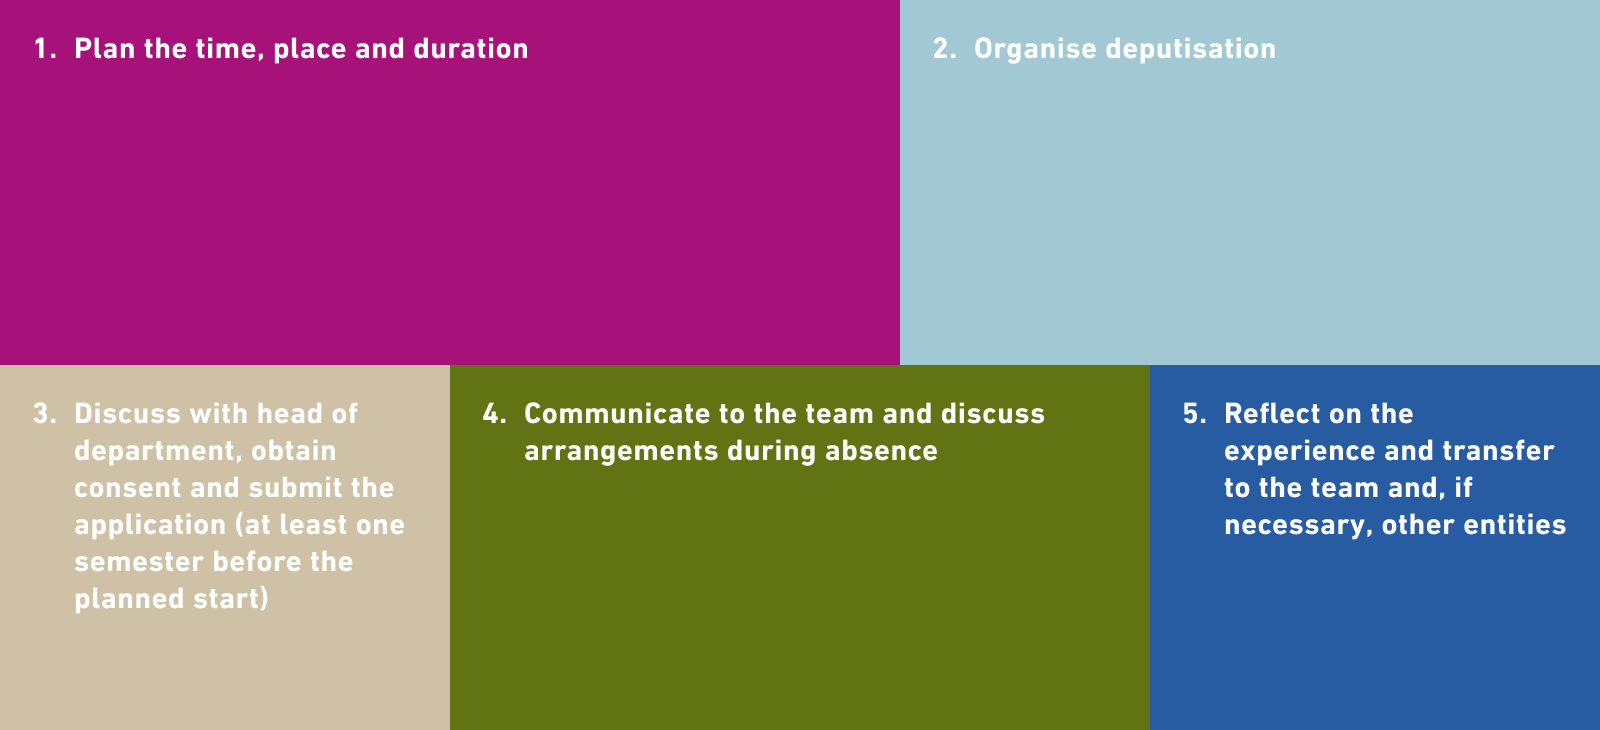 1. Plan the time, place and duration  2. Organise deputisation  3. Discuss with head of department, obtain consent and submit the application (at least one semester before the planned start)  4. Communicate to the team and discuss arrangements during absence 5. Reflect on the experience and transfer to the team and, if necessary, other entities